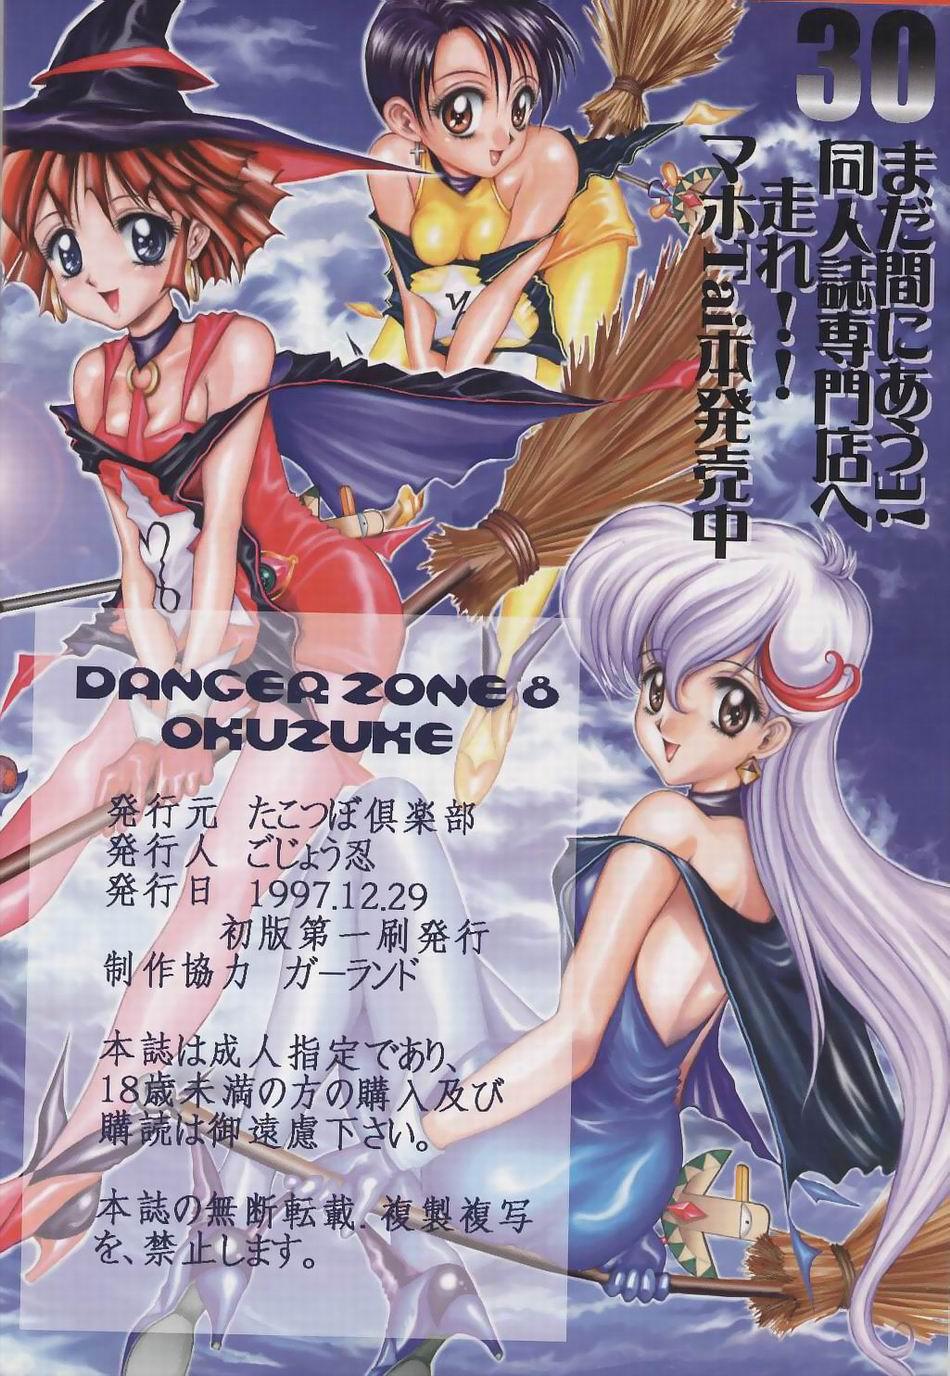 Sextoy BEST OF DANGER ZONE 8 - Gaogaigar Swingers - Page 29